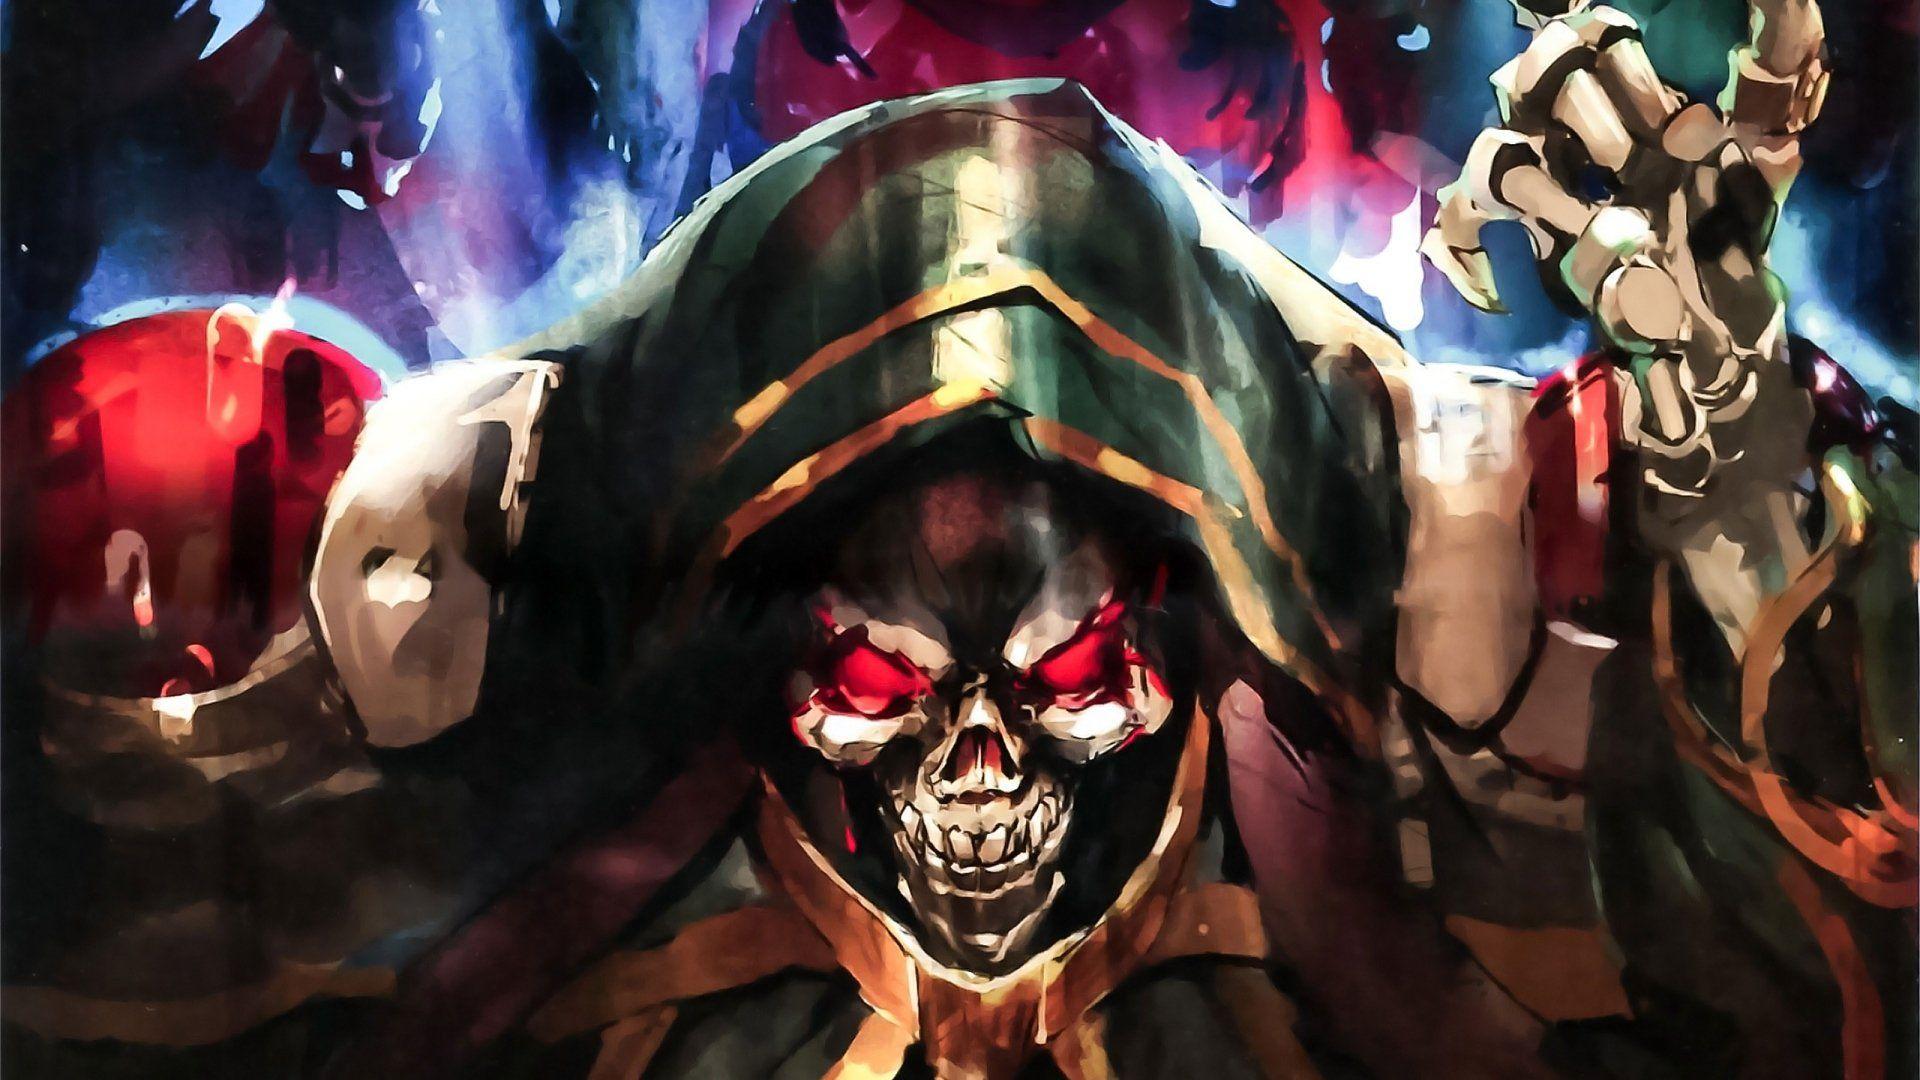 Anime Overlord Overlord (Anime) Ainz Ooal Gown Wallpaper